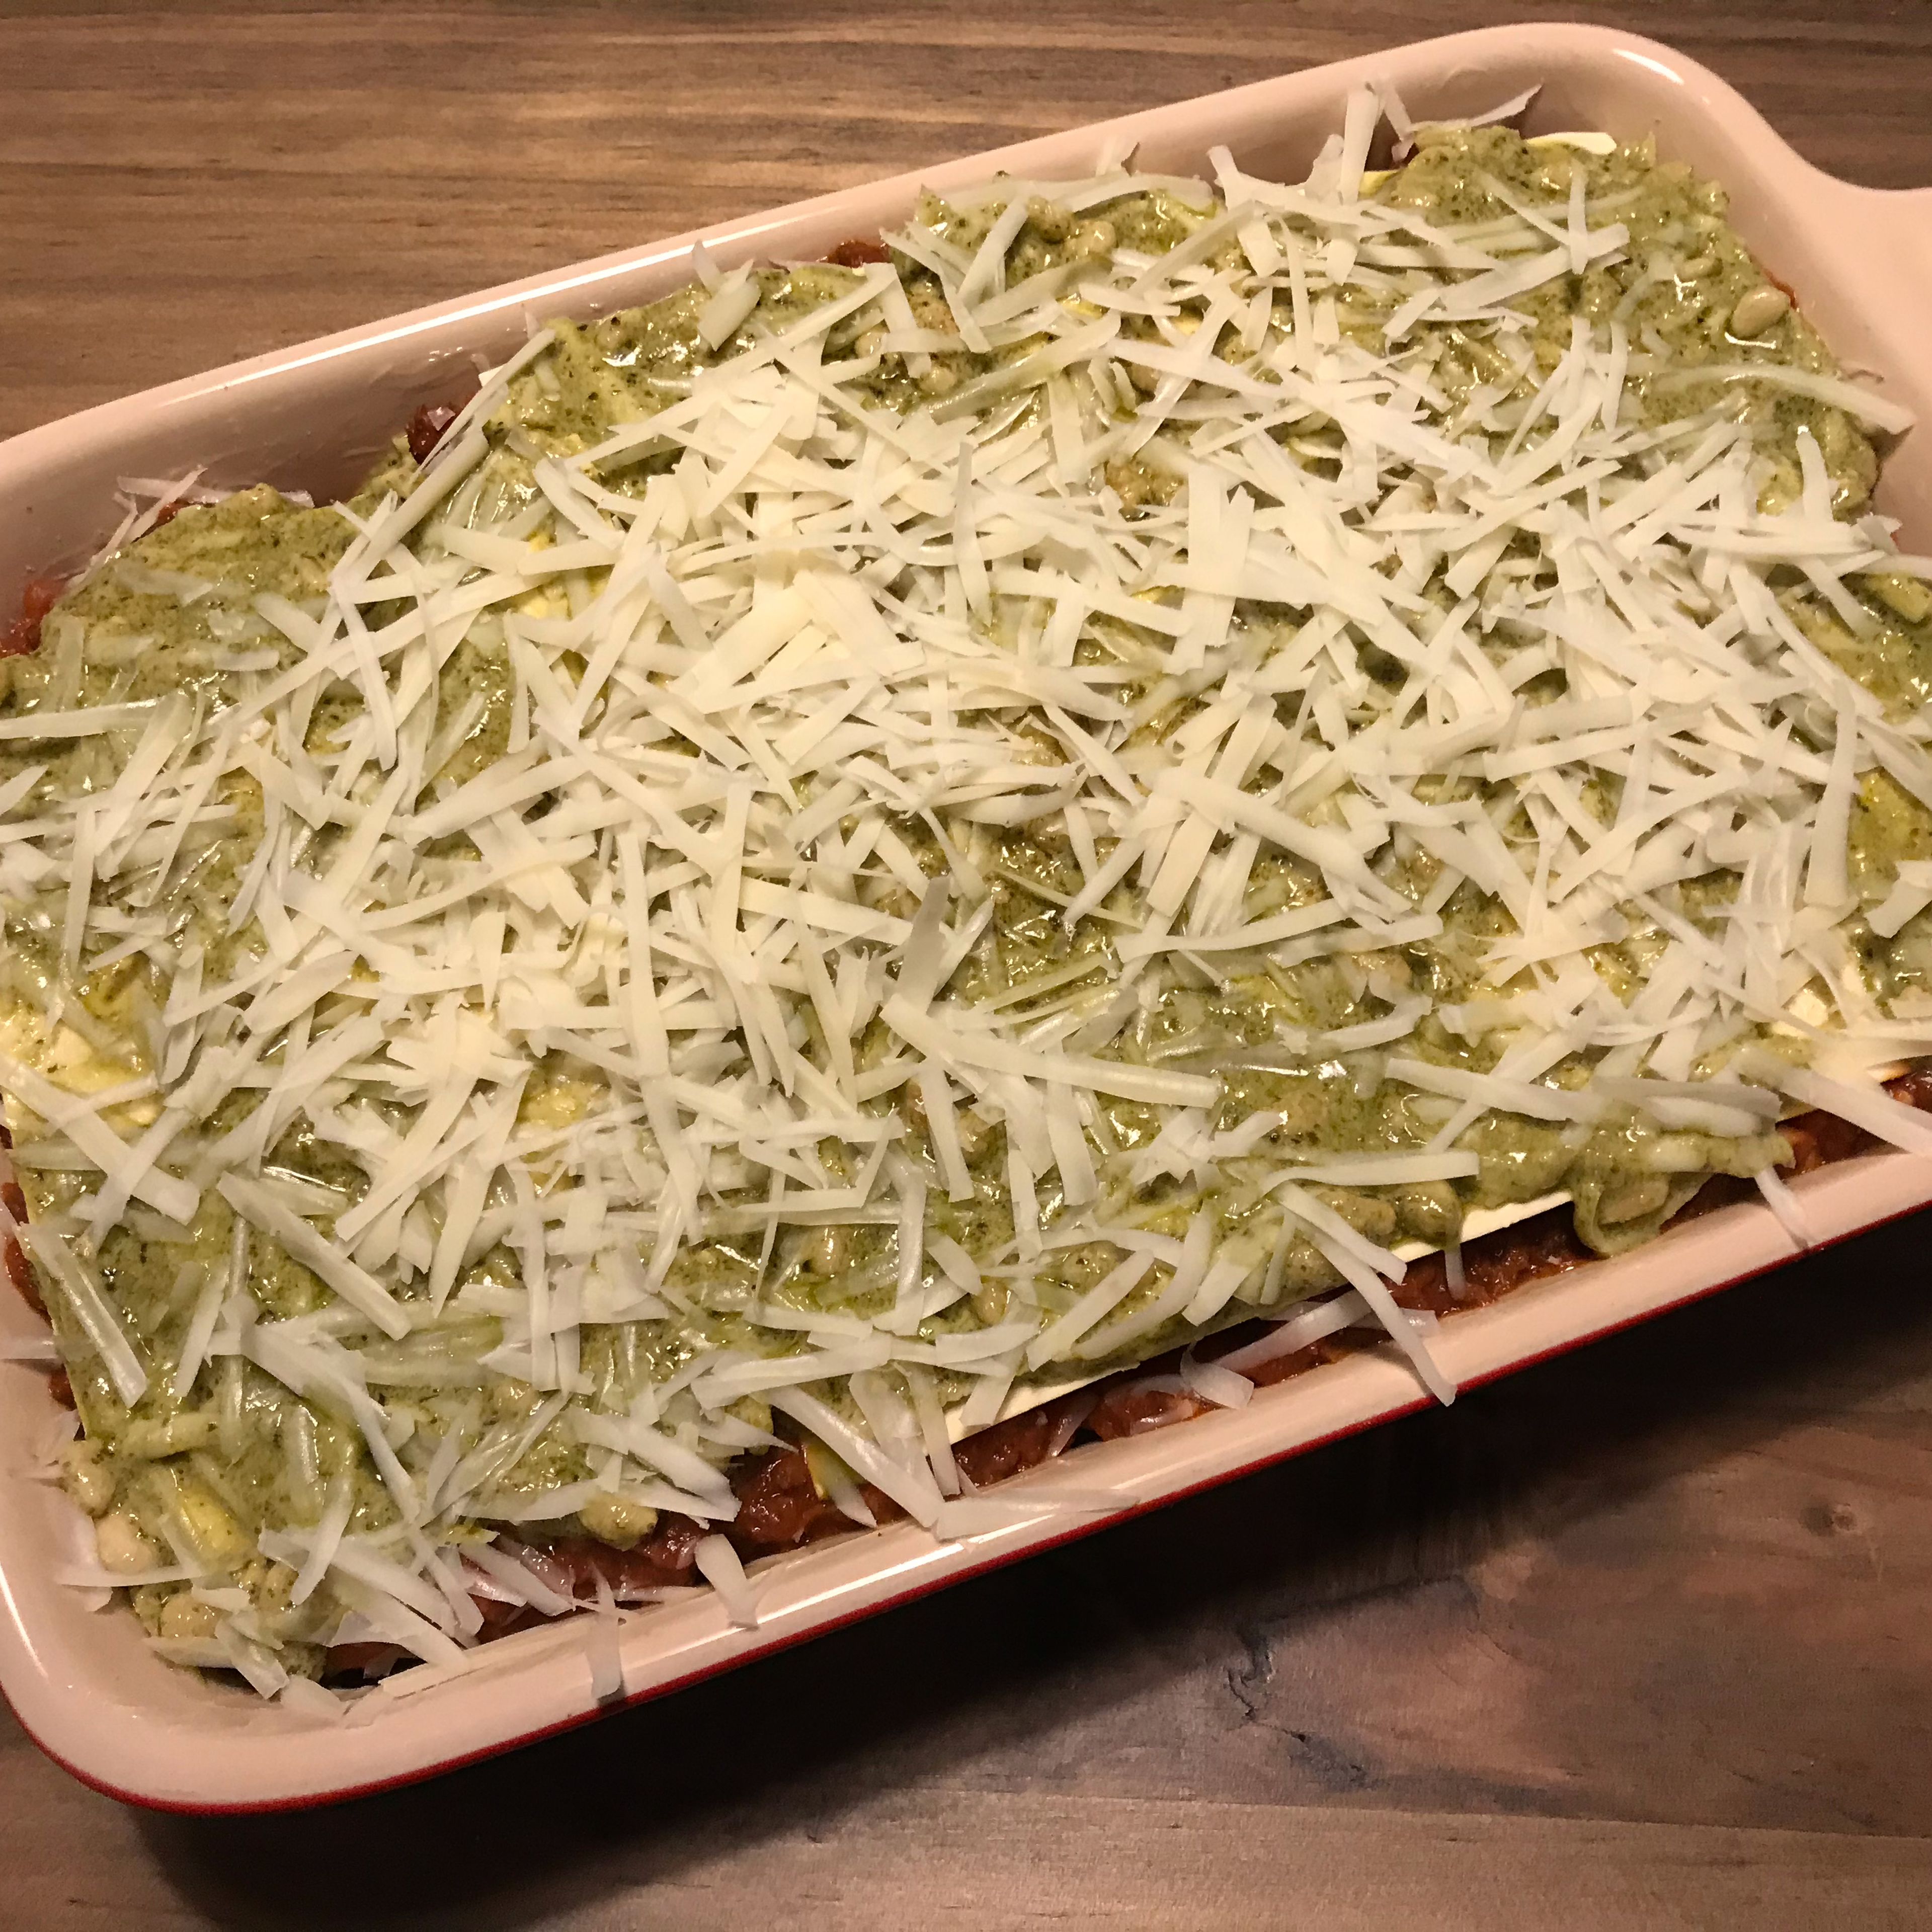 Preheat oven to 180°C/350°F. Slightly grease a baking dish with butter, alternately layer pasta, red filling, pasta, green filling on top of each other. Grate a little nutmeg onto one of the middle layers. Grate the remaining cheese on the top layer. Bake in the oven at 180°C/350°F for approx. 30 min., until the cheese is golden brown.